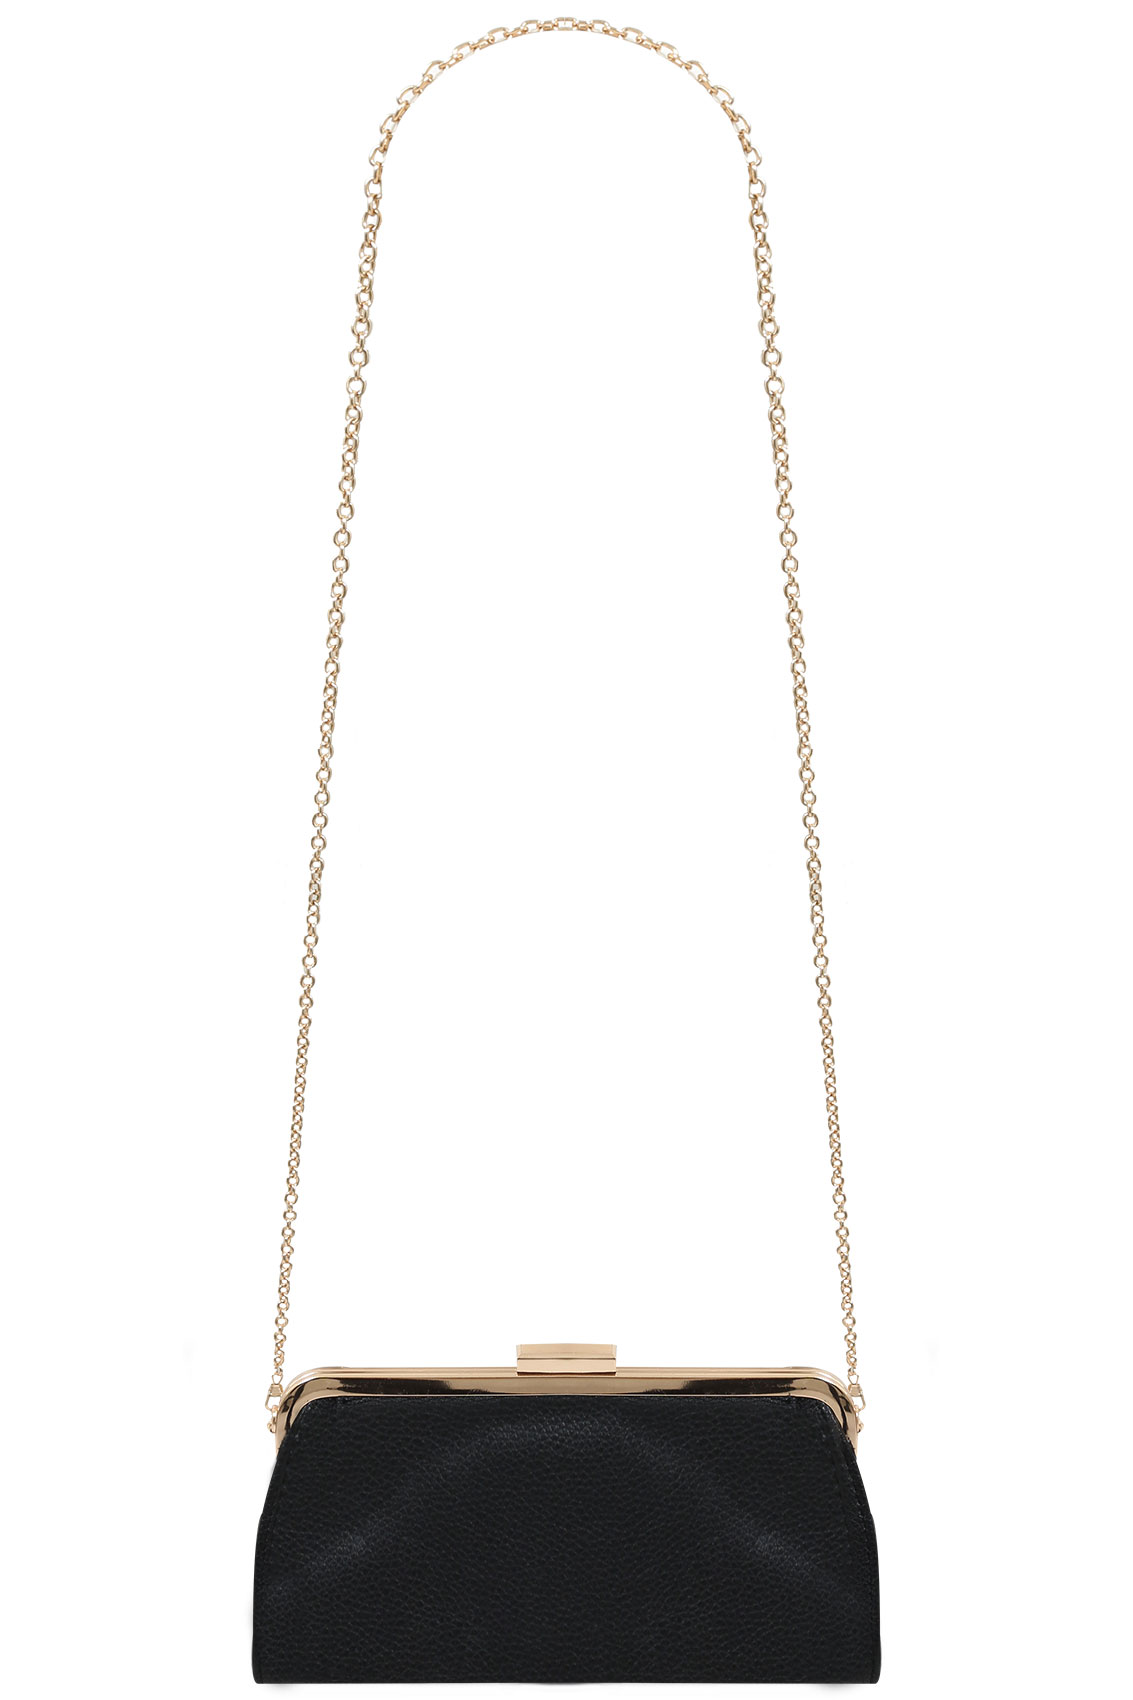 Black Clutch Bag With Gold Chain